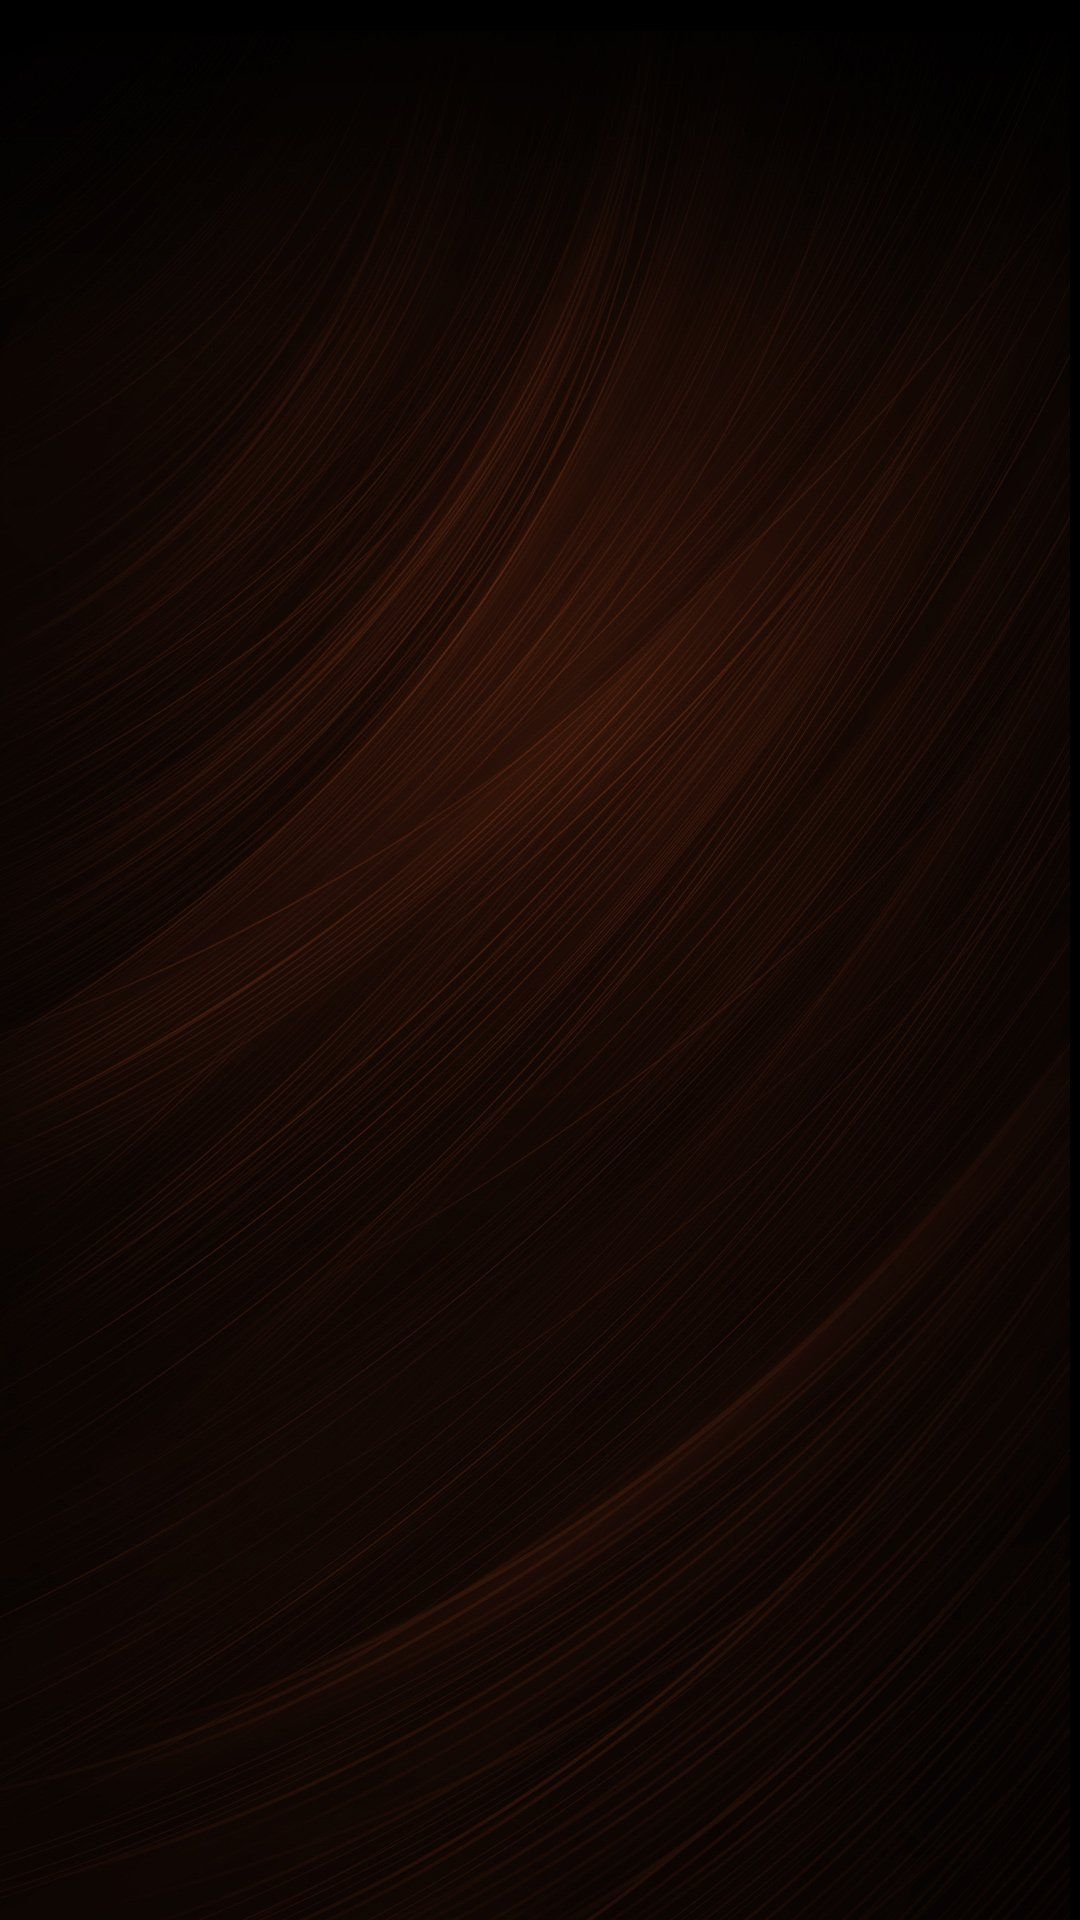 Download wallpaper 1280x2120 fractal, dark, abstract, iphone 6 plus,  1280x2120 hd background, 1872